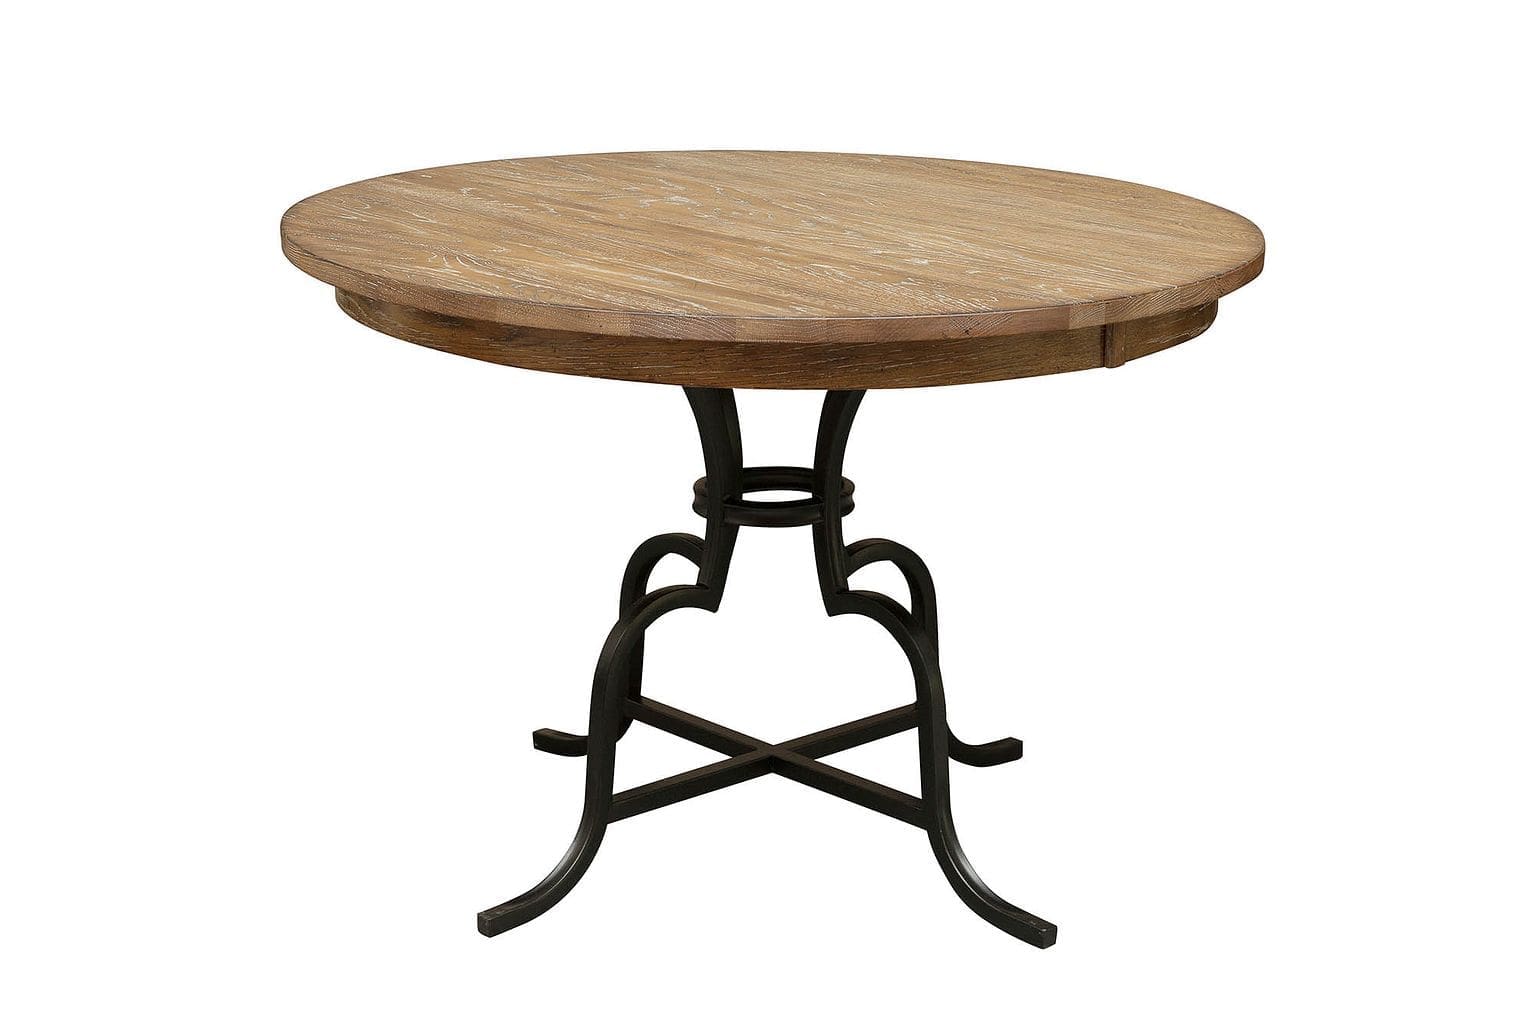 44" ROUND COUNTER HEIGHT TABLE WITH METAL BASE